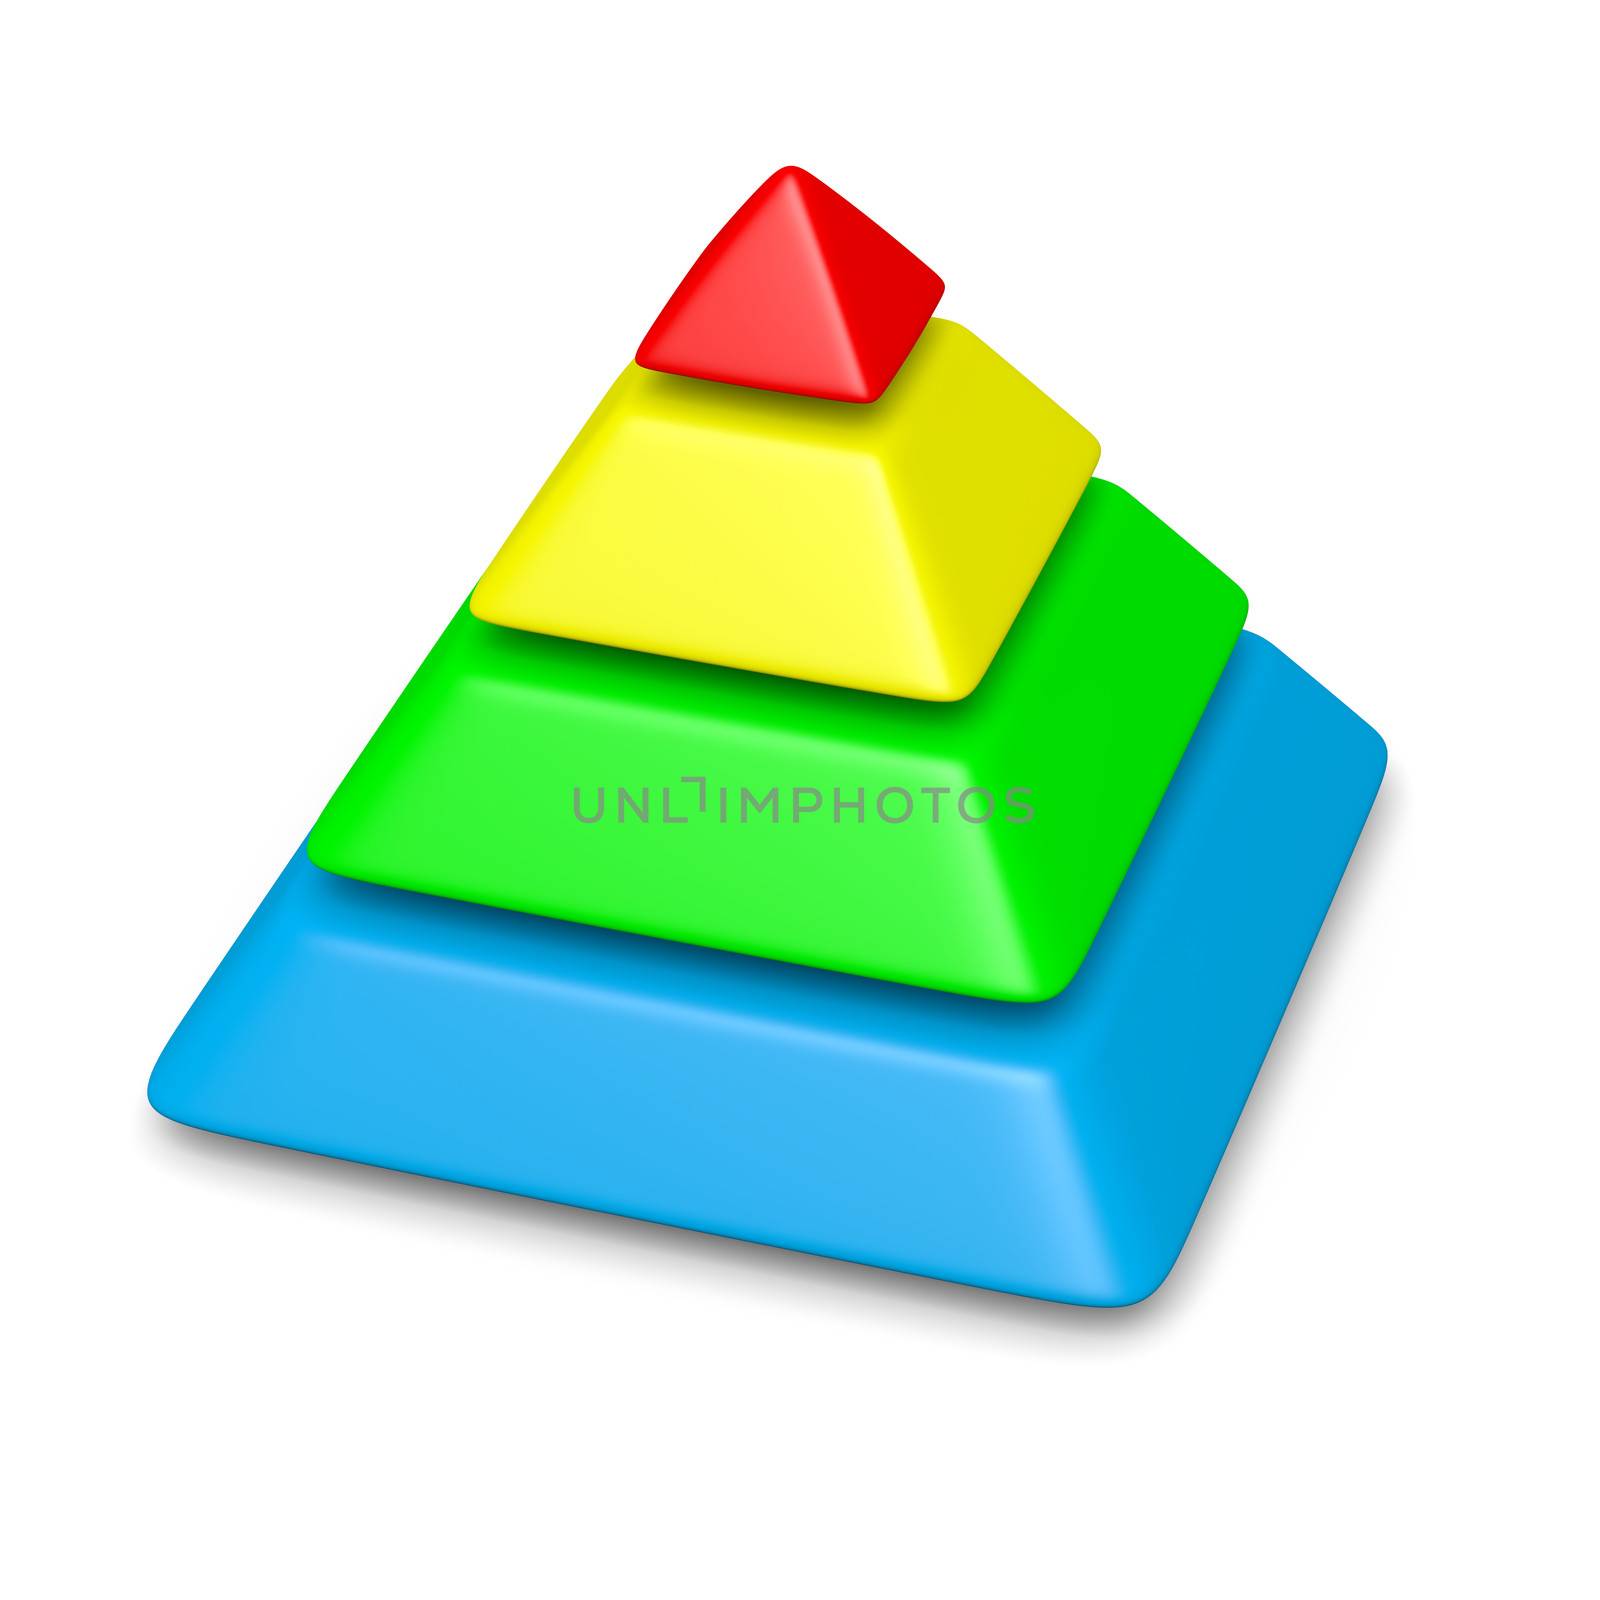 colorful blank pyramid 4 levels stack chart with shadow 3d illustration